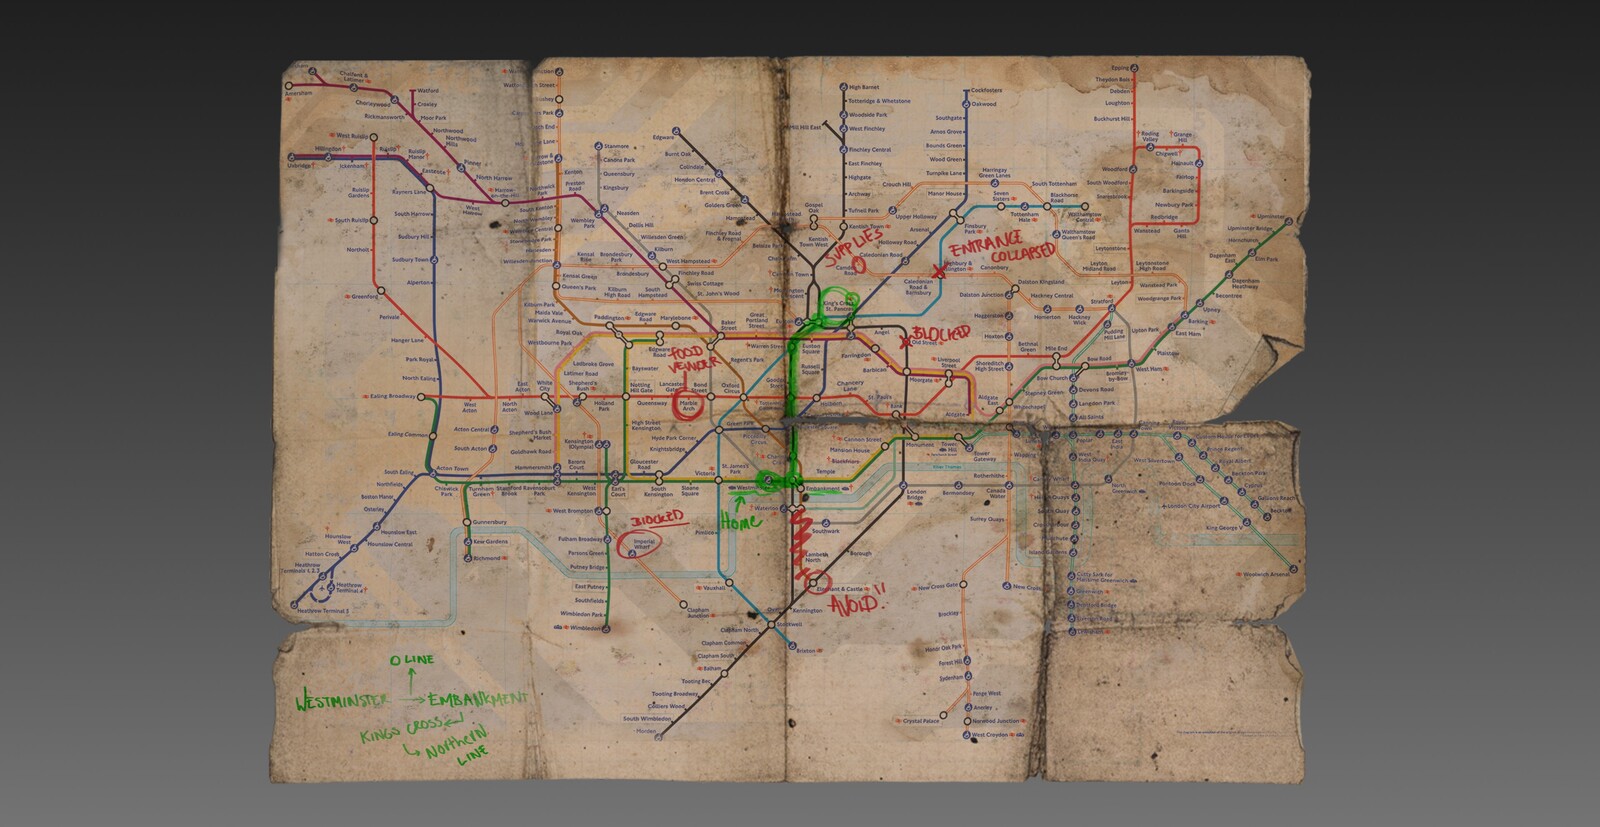 Alex's Underground Map Design, one of her unique personal items she carries on her travels.